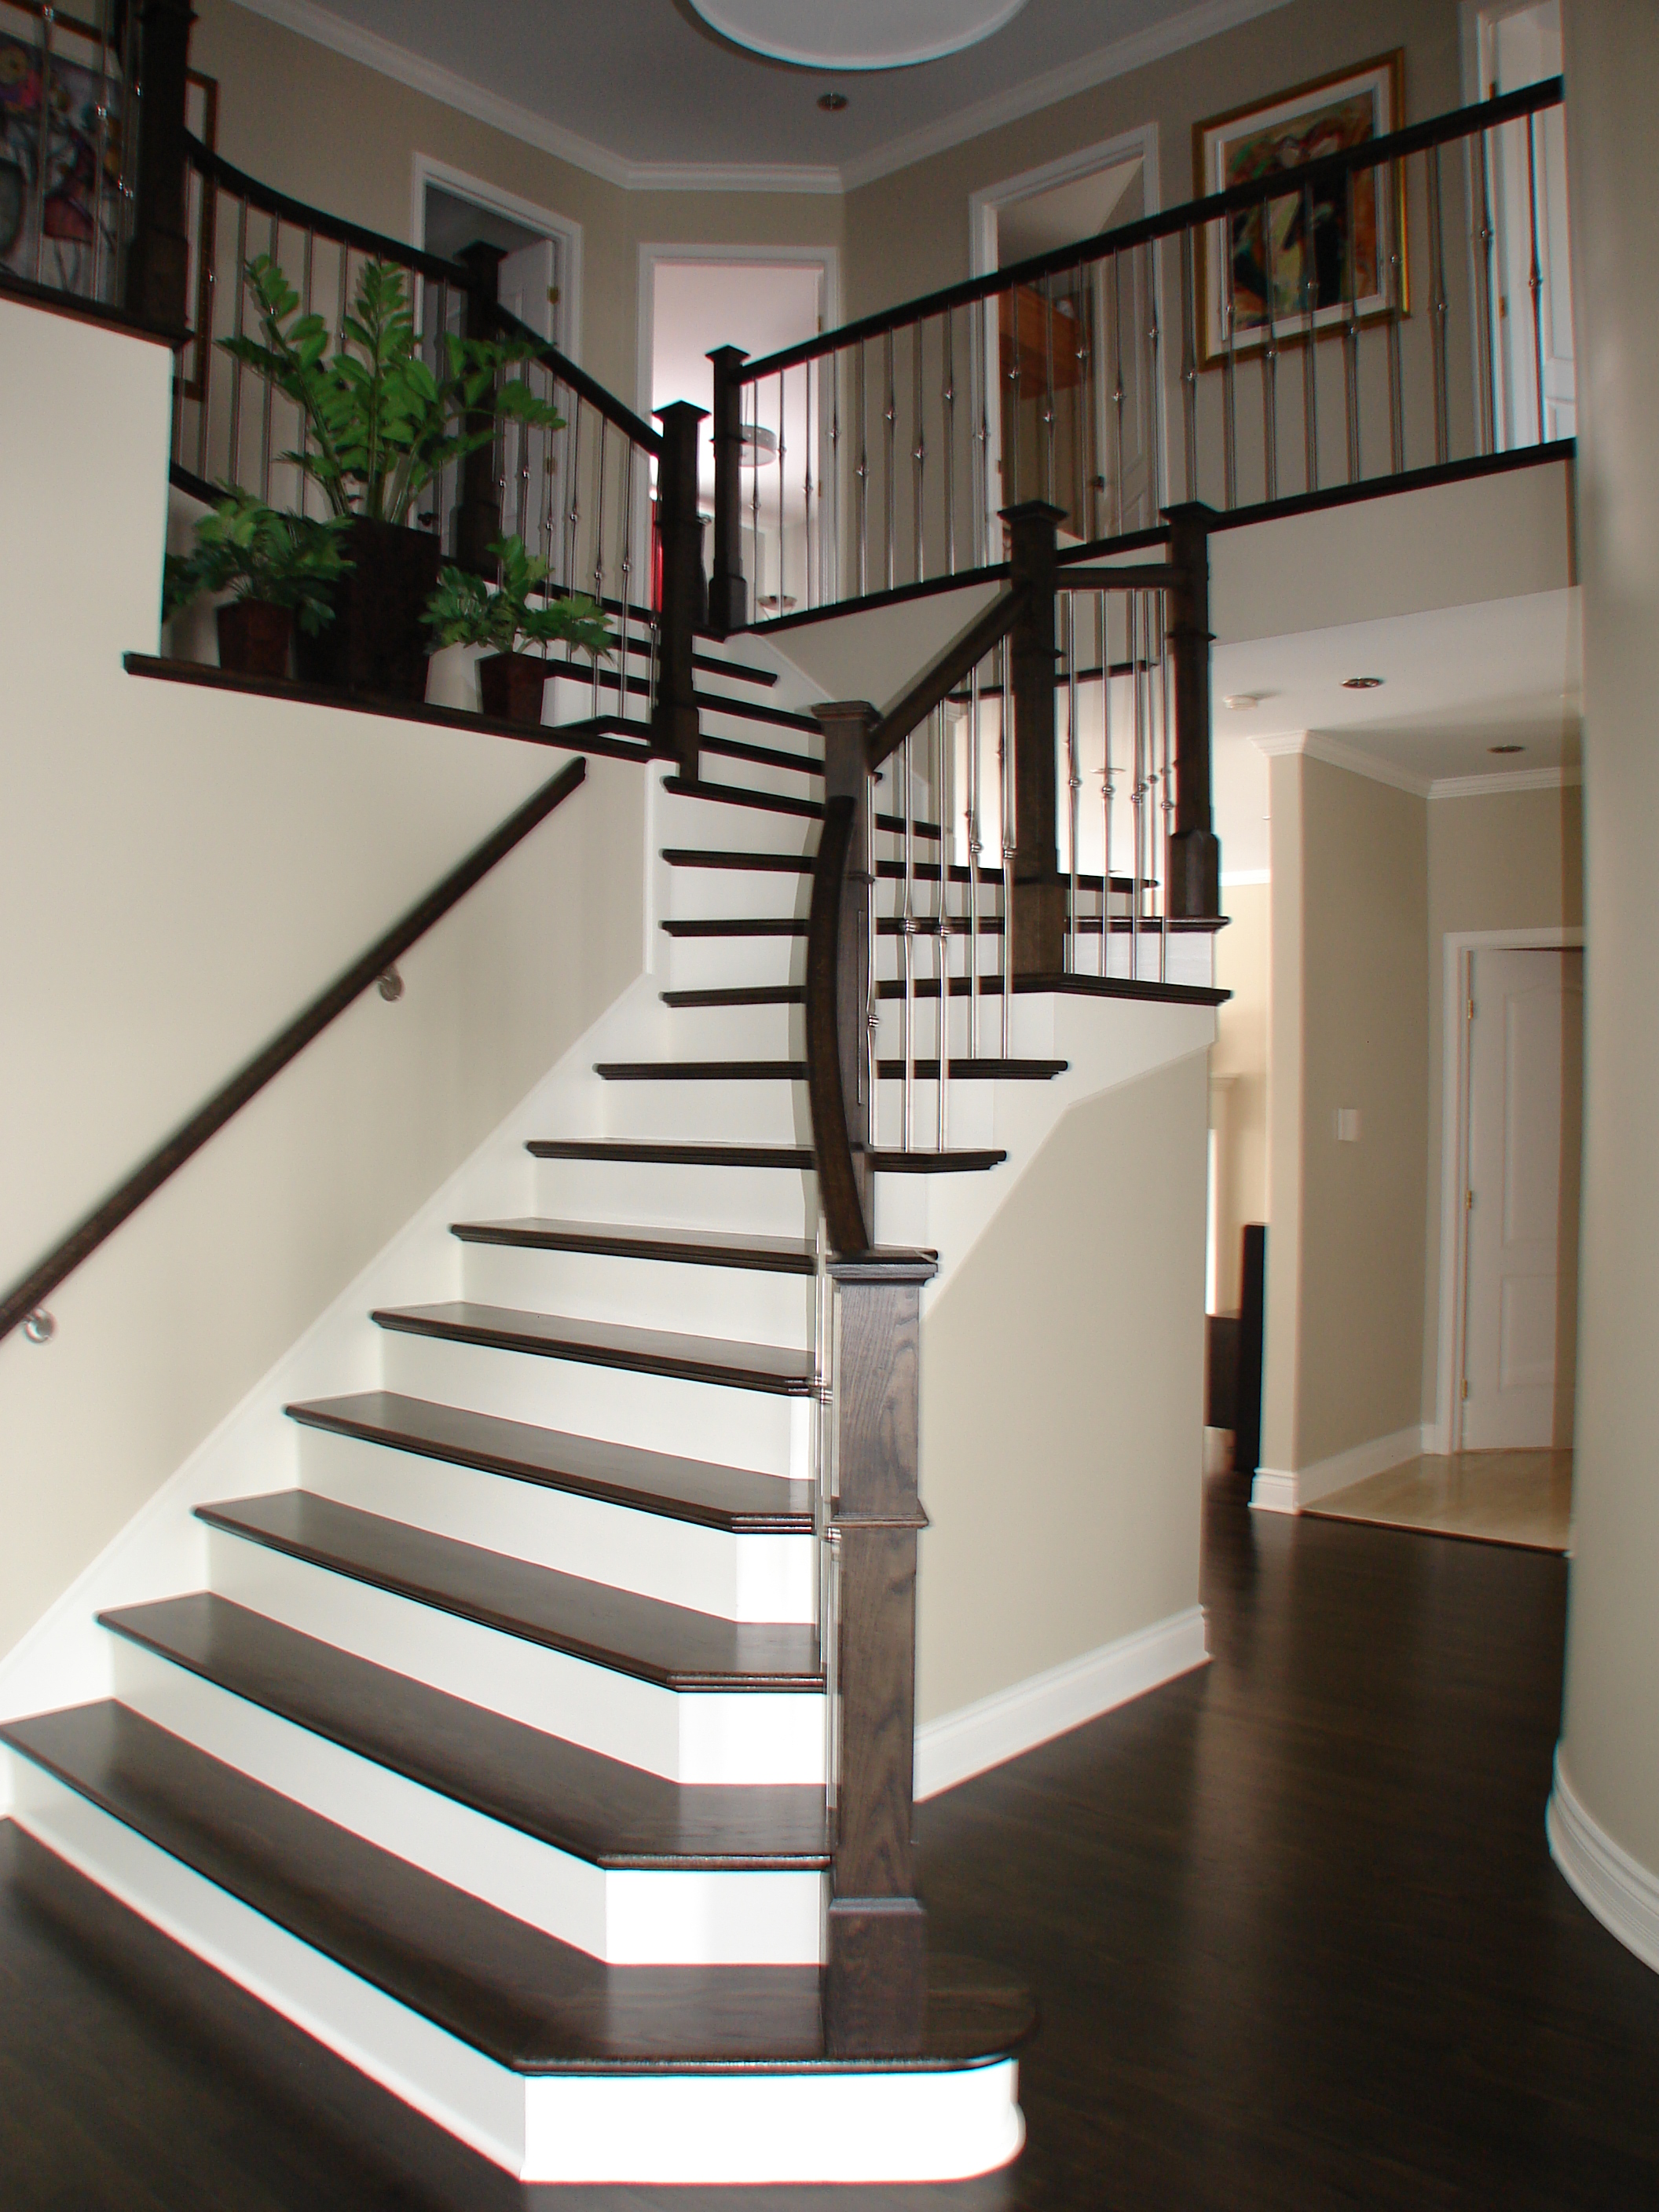 Stairs After - Interior Decorating West Island Montreal